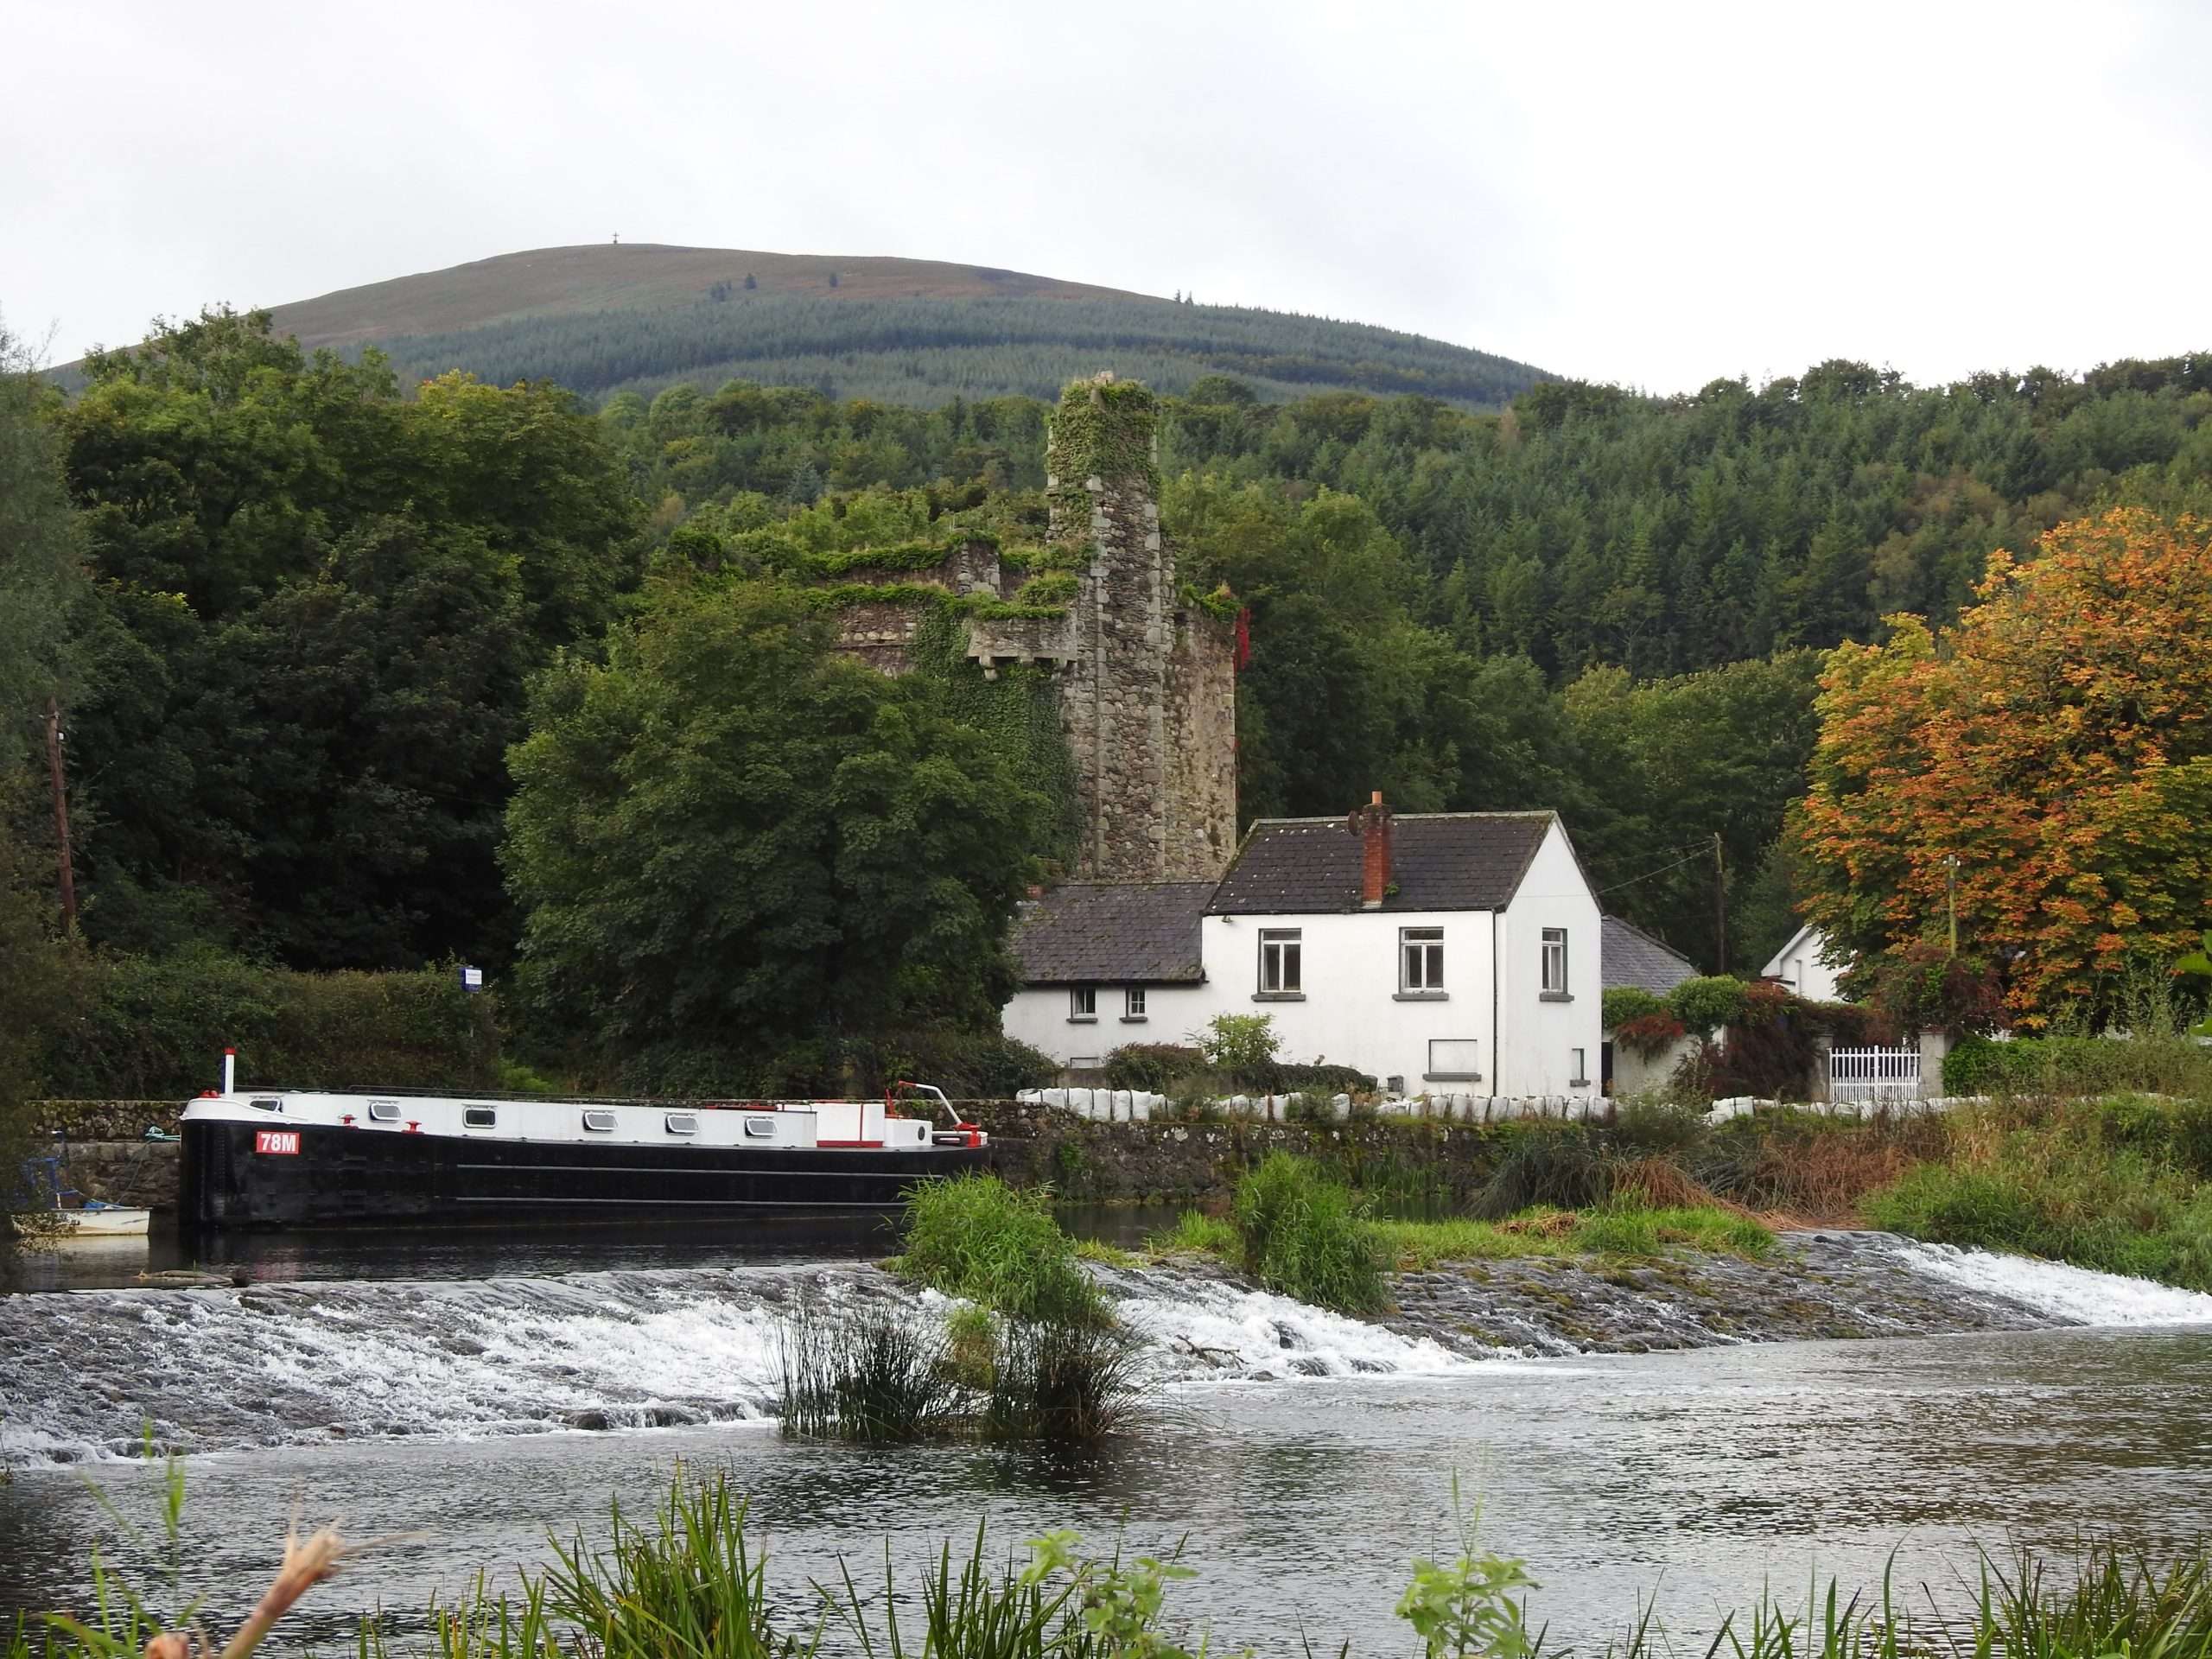 View of the weir, the lock house and Brandon hill looking over the river Barrow